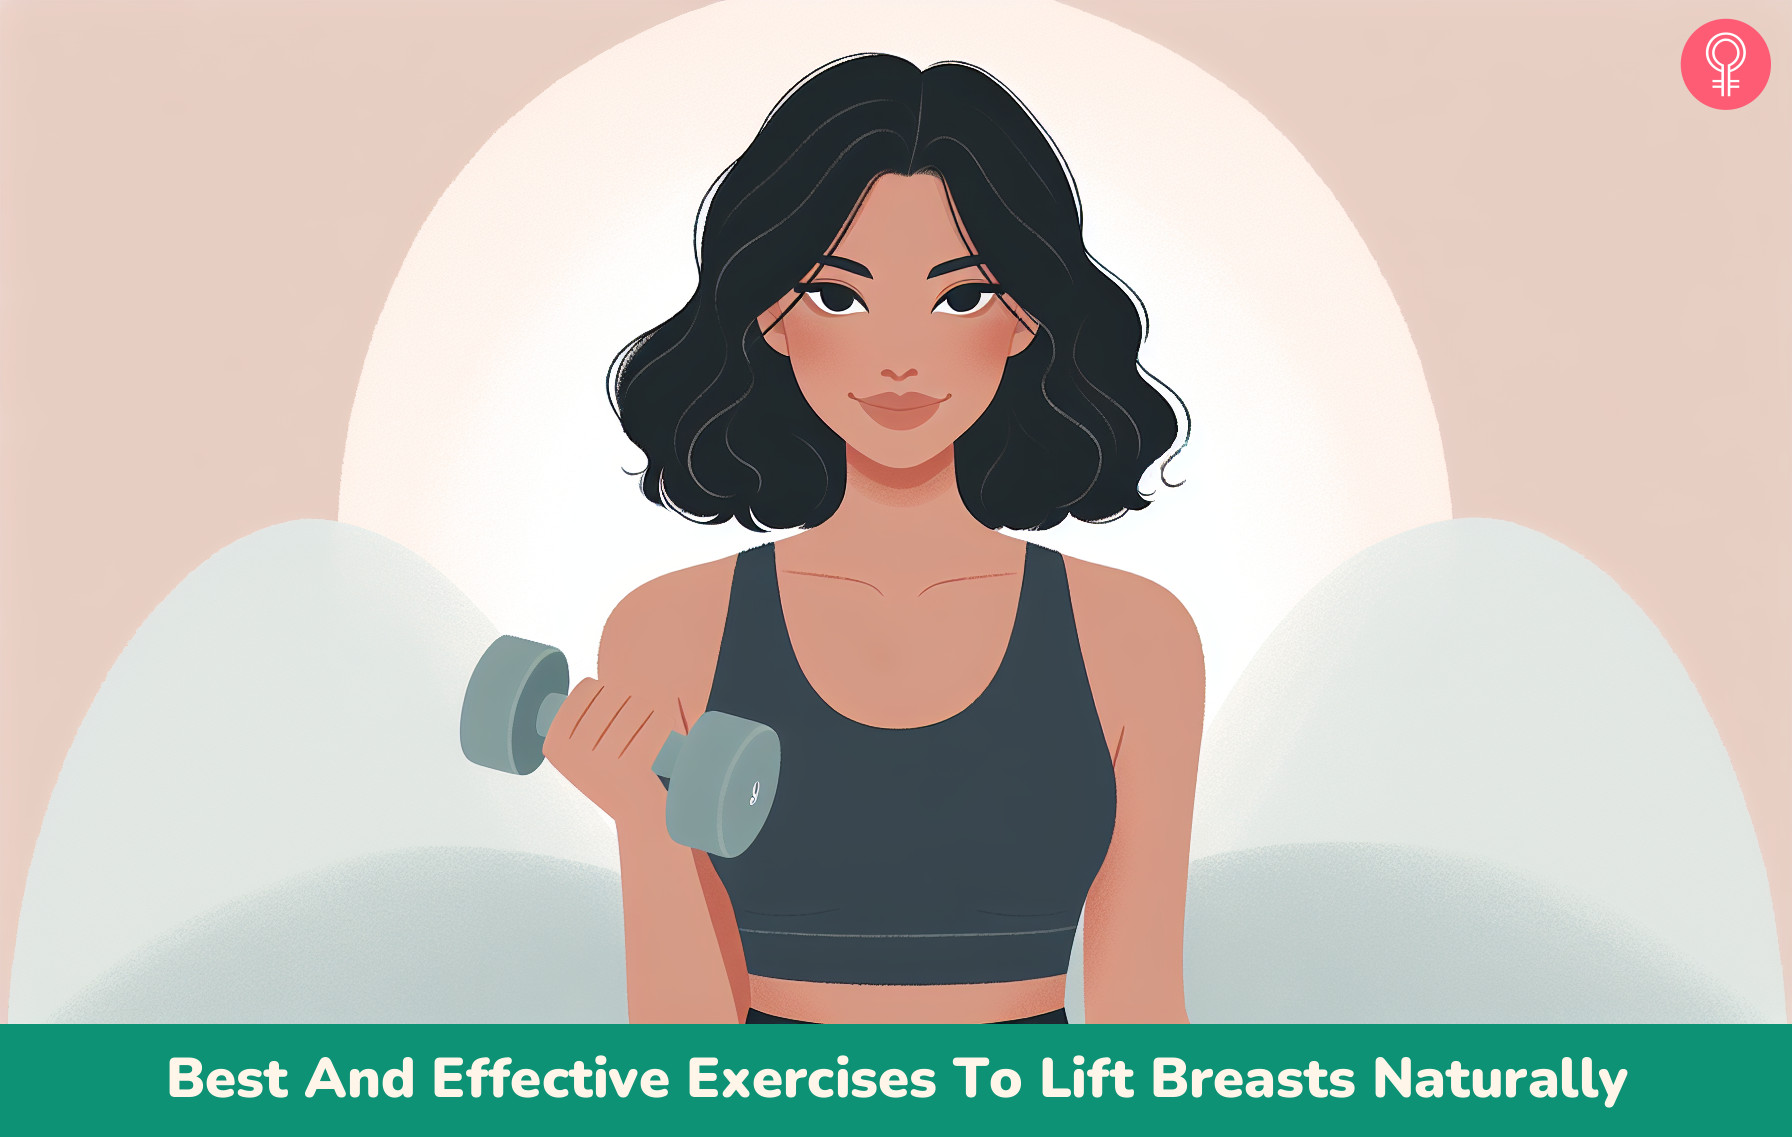 Lift Your Breasts in 30 Days, Burn Armpits + Bra Fat, Toned Slim Arms